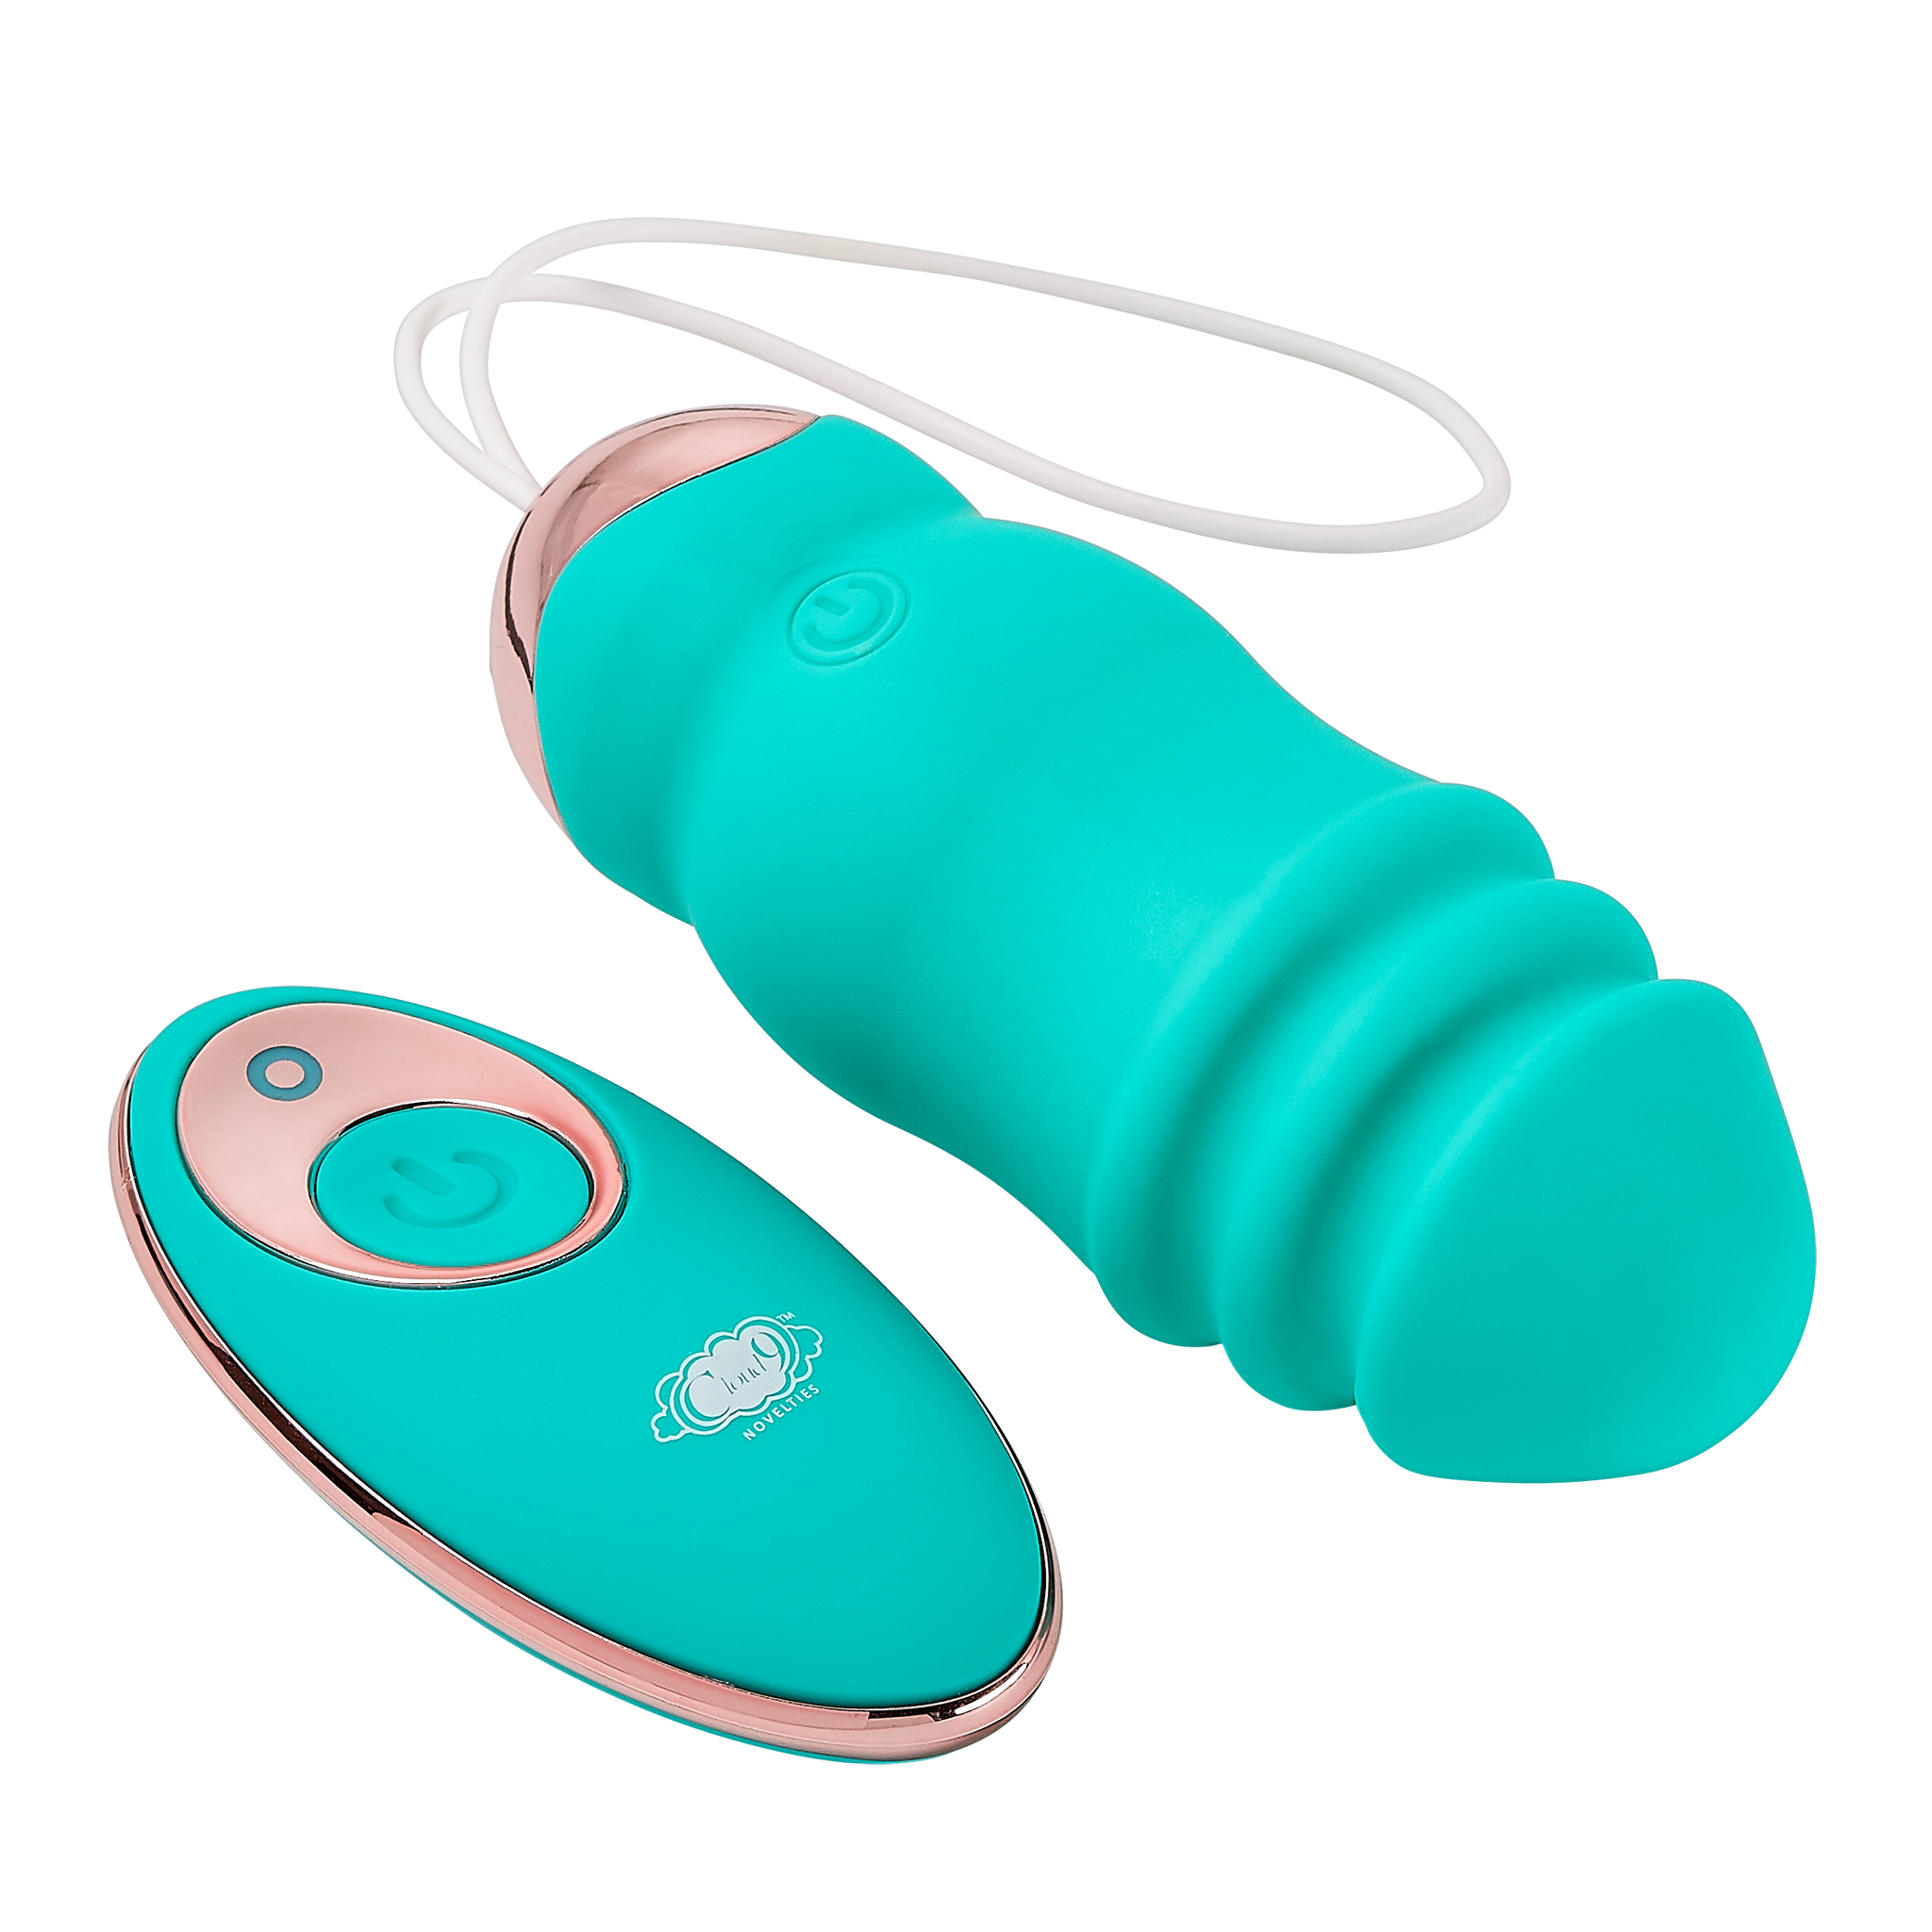 CLOUD 9 HEALTH & WELLNESS WIRELESS REMOTE CONTROL EGG W/ STROKING MOTION TEAL - Click Image to Close